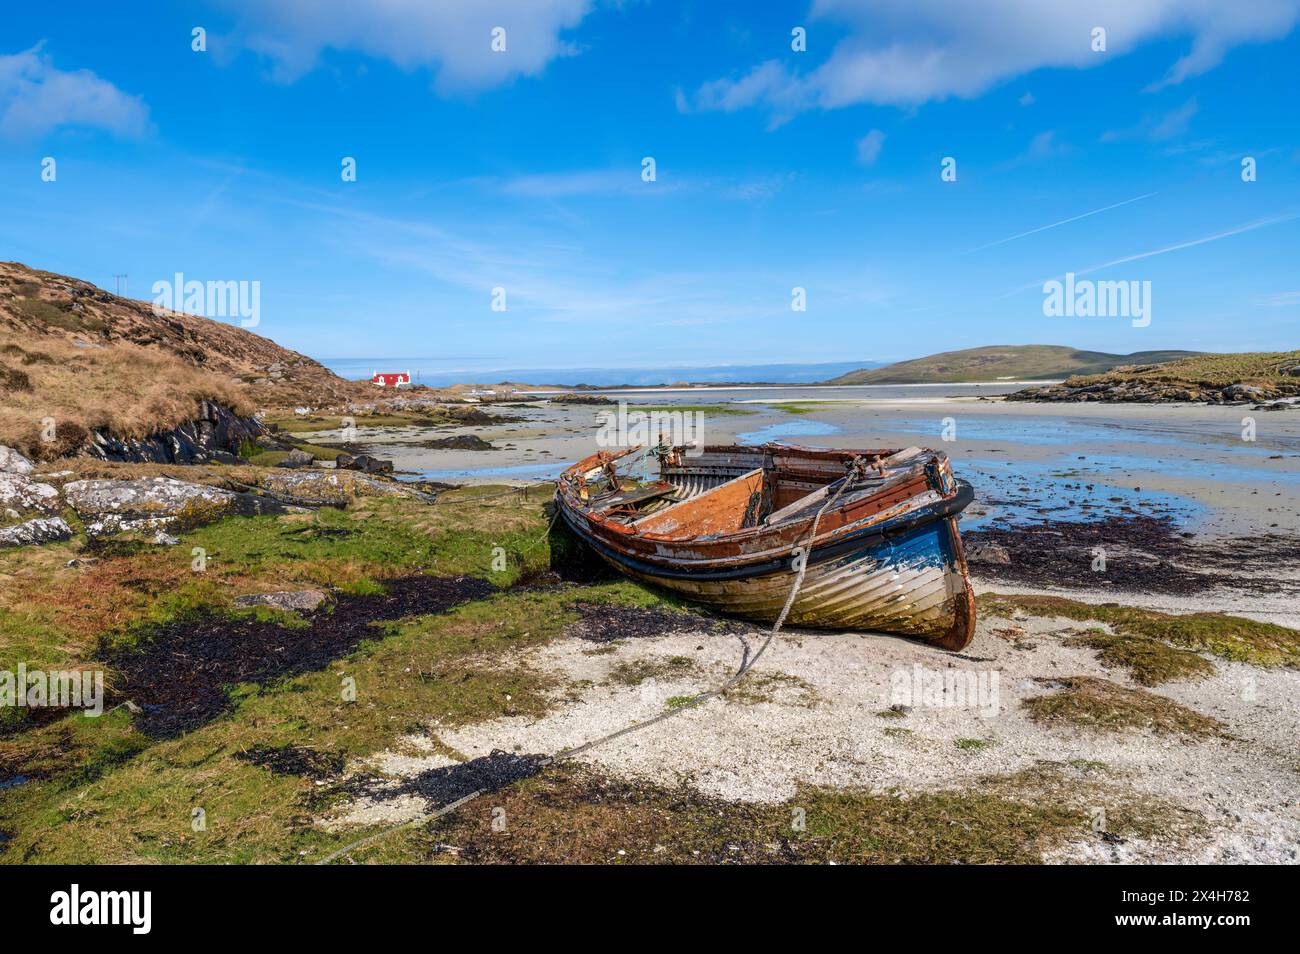 Old Fishing boat on Traigh Mhor, The Isle of Barra, Scotland. Stock Photo